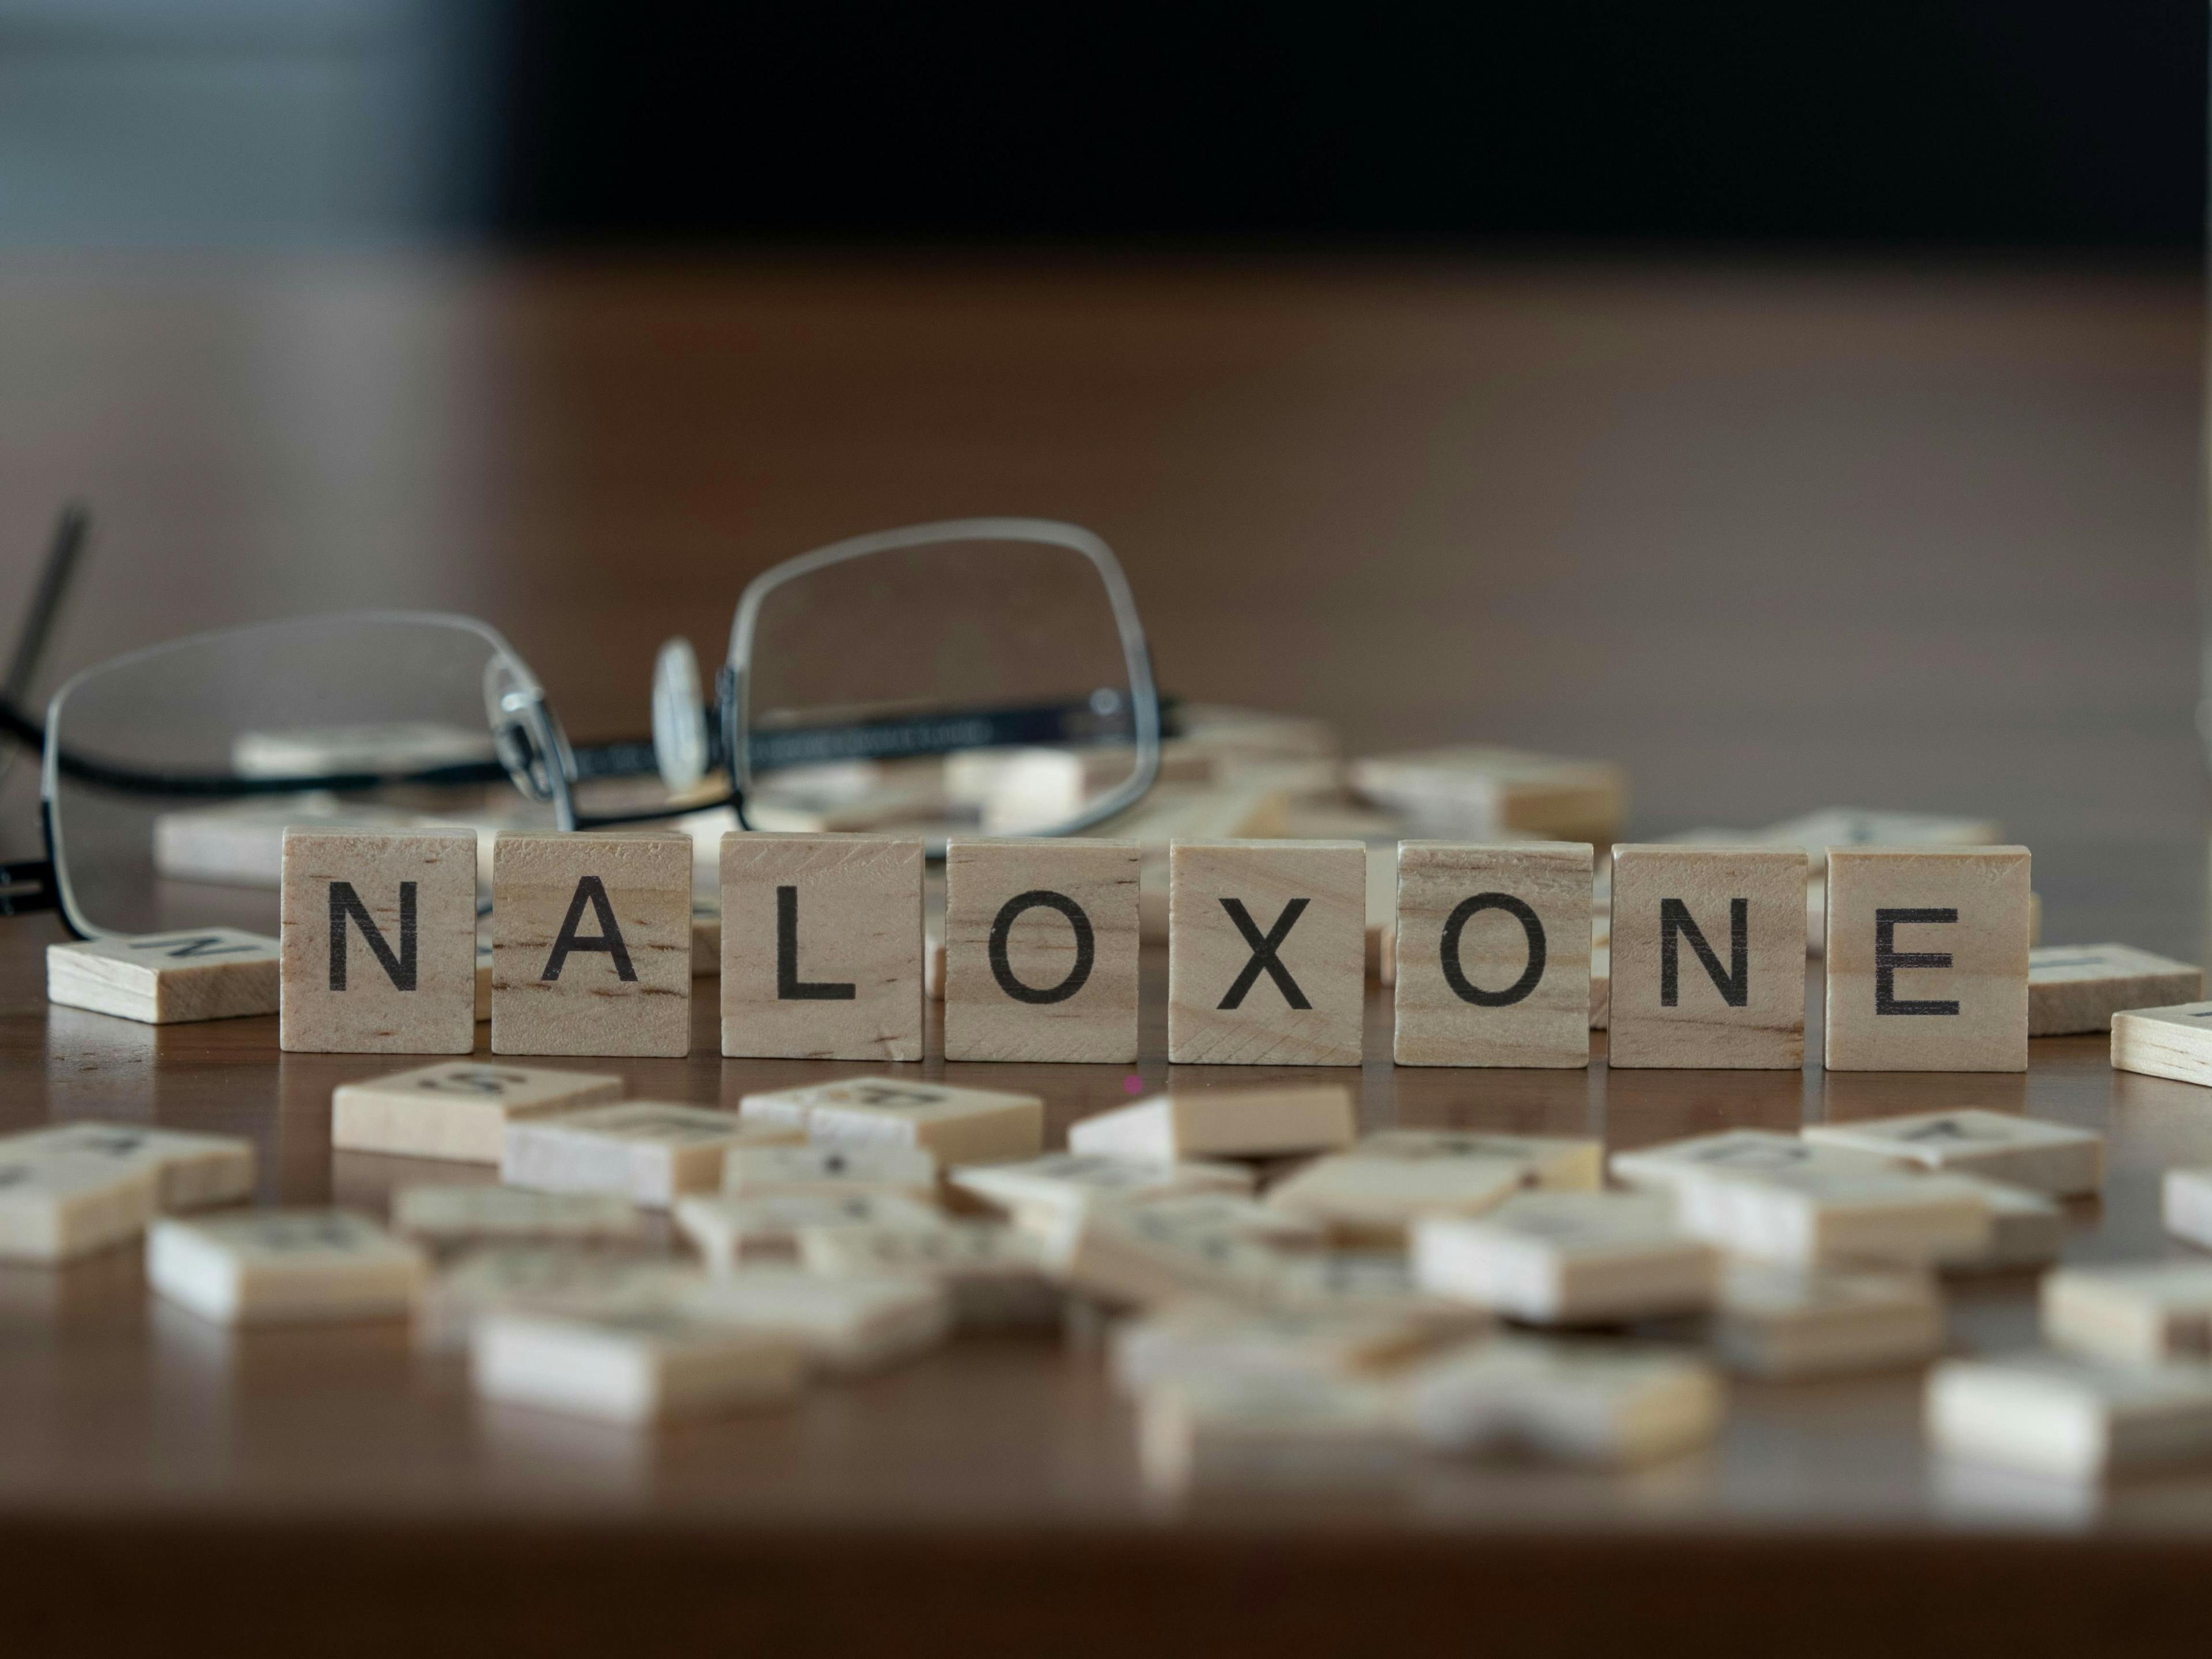 Naloxone concept represented by wooden letter tiles.